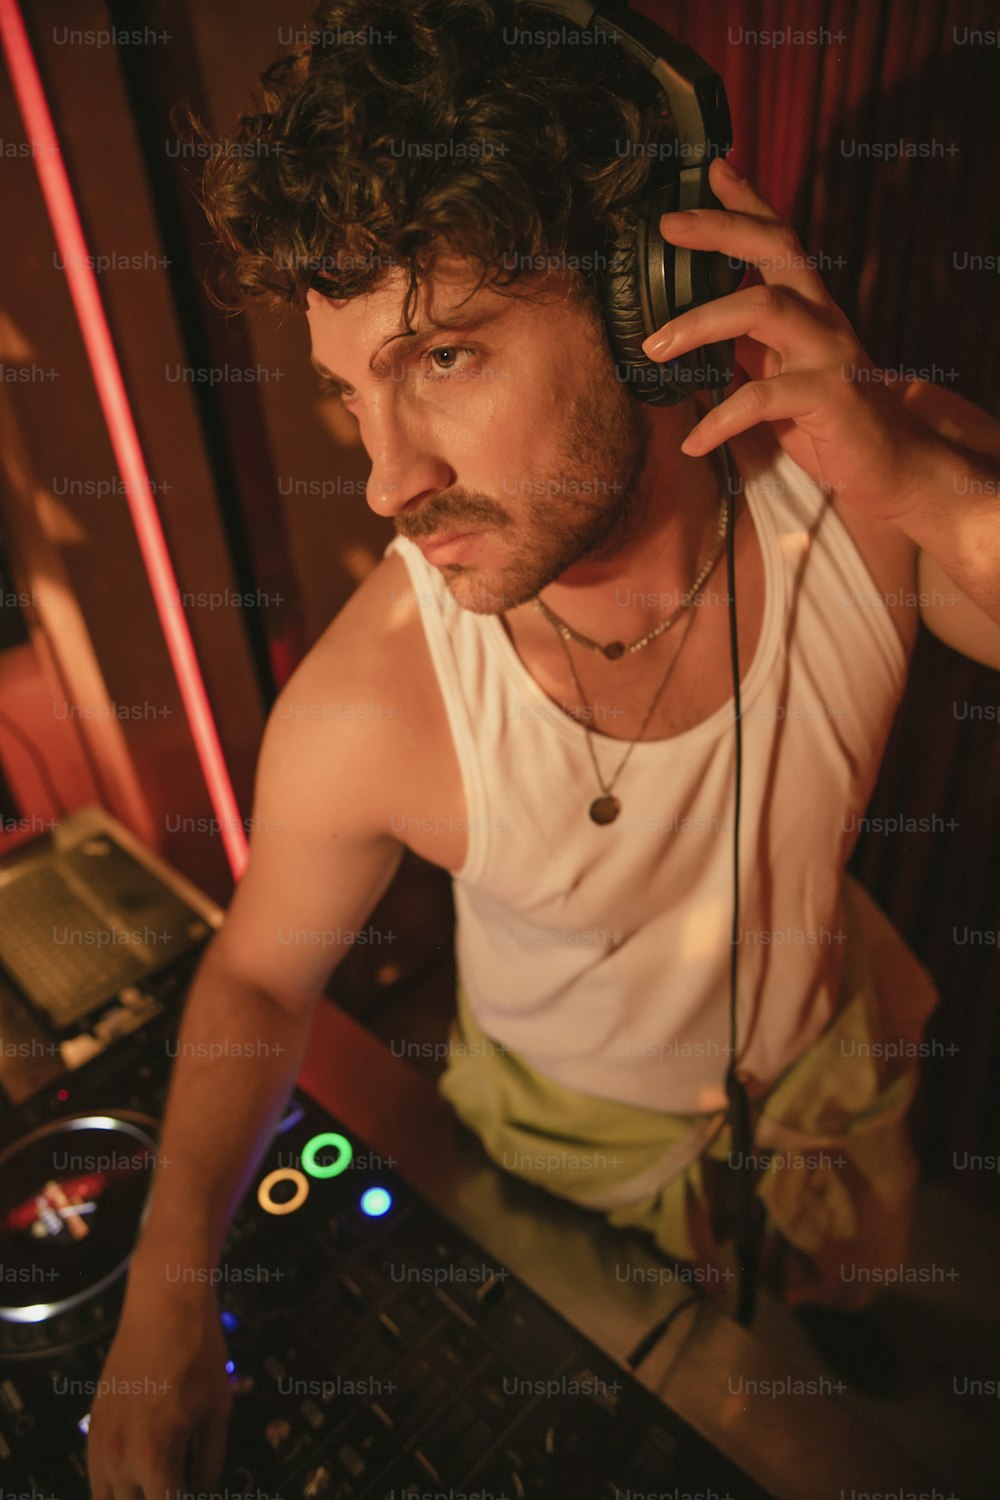 a man with headphones on sitting in front of a dj mixer